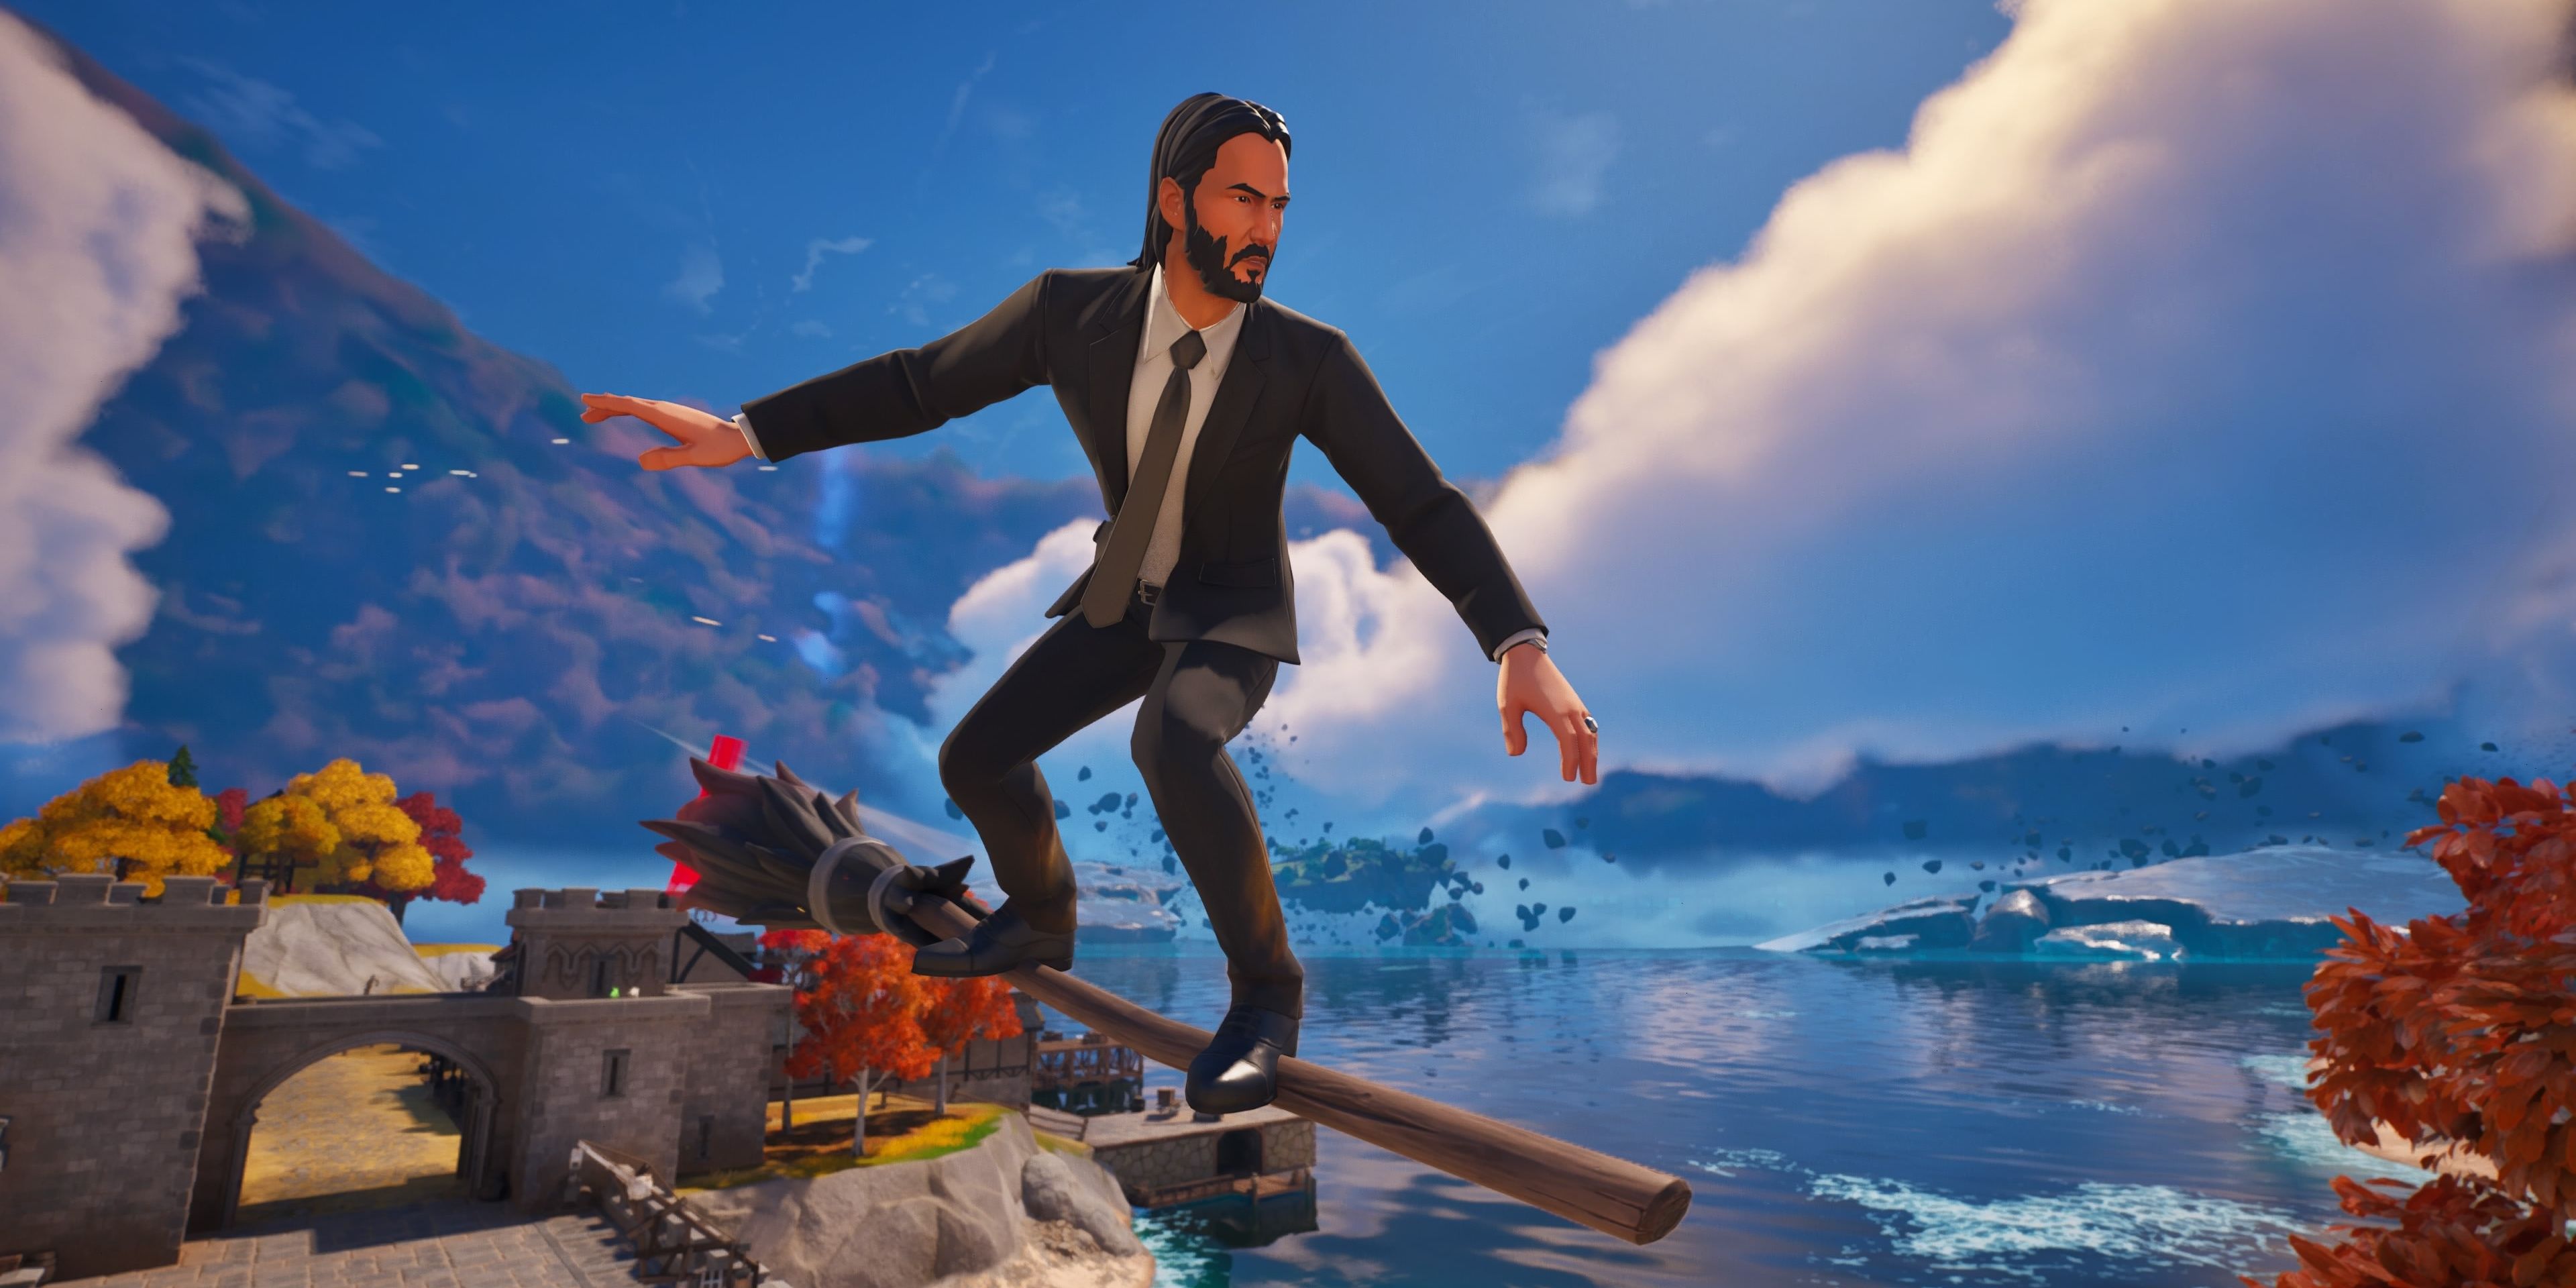 john wick using the witch broom